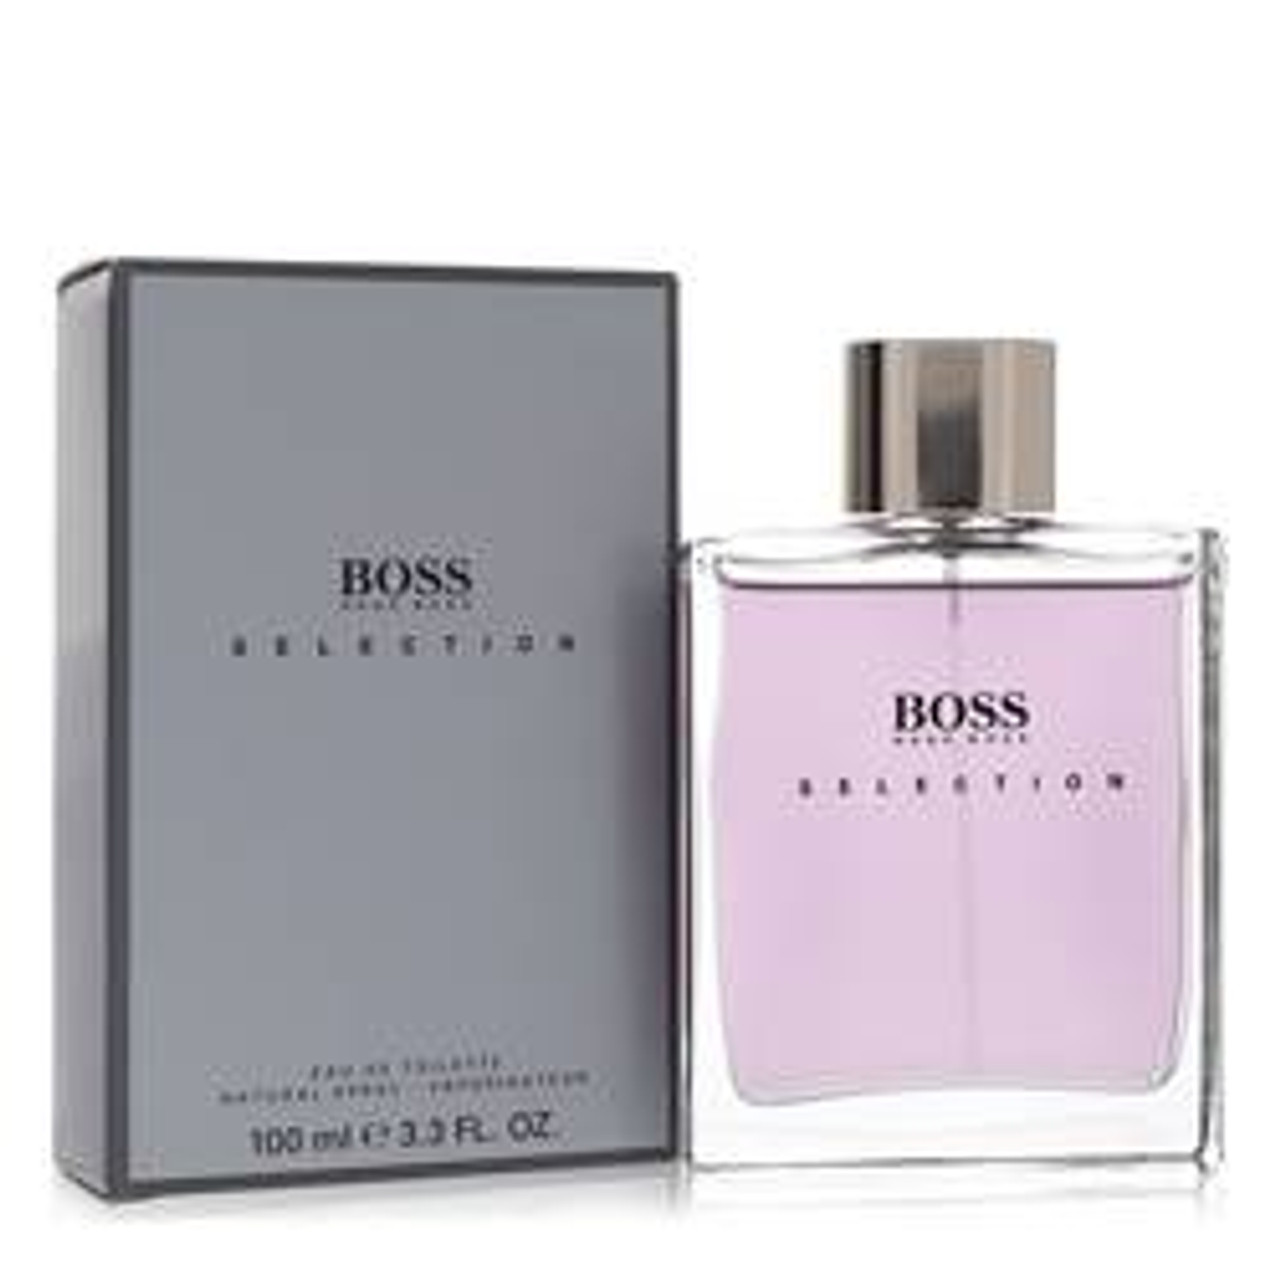 Boss Selection Cologne By Hugo Boss Eau De Toilette Spray 3.3 oz for Men - [From 100.00 - Choose pk Qty ] - *Ships from Miami